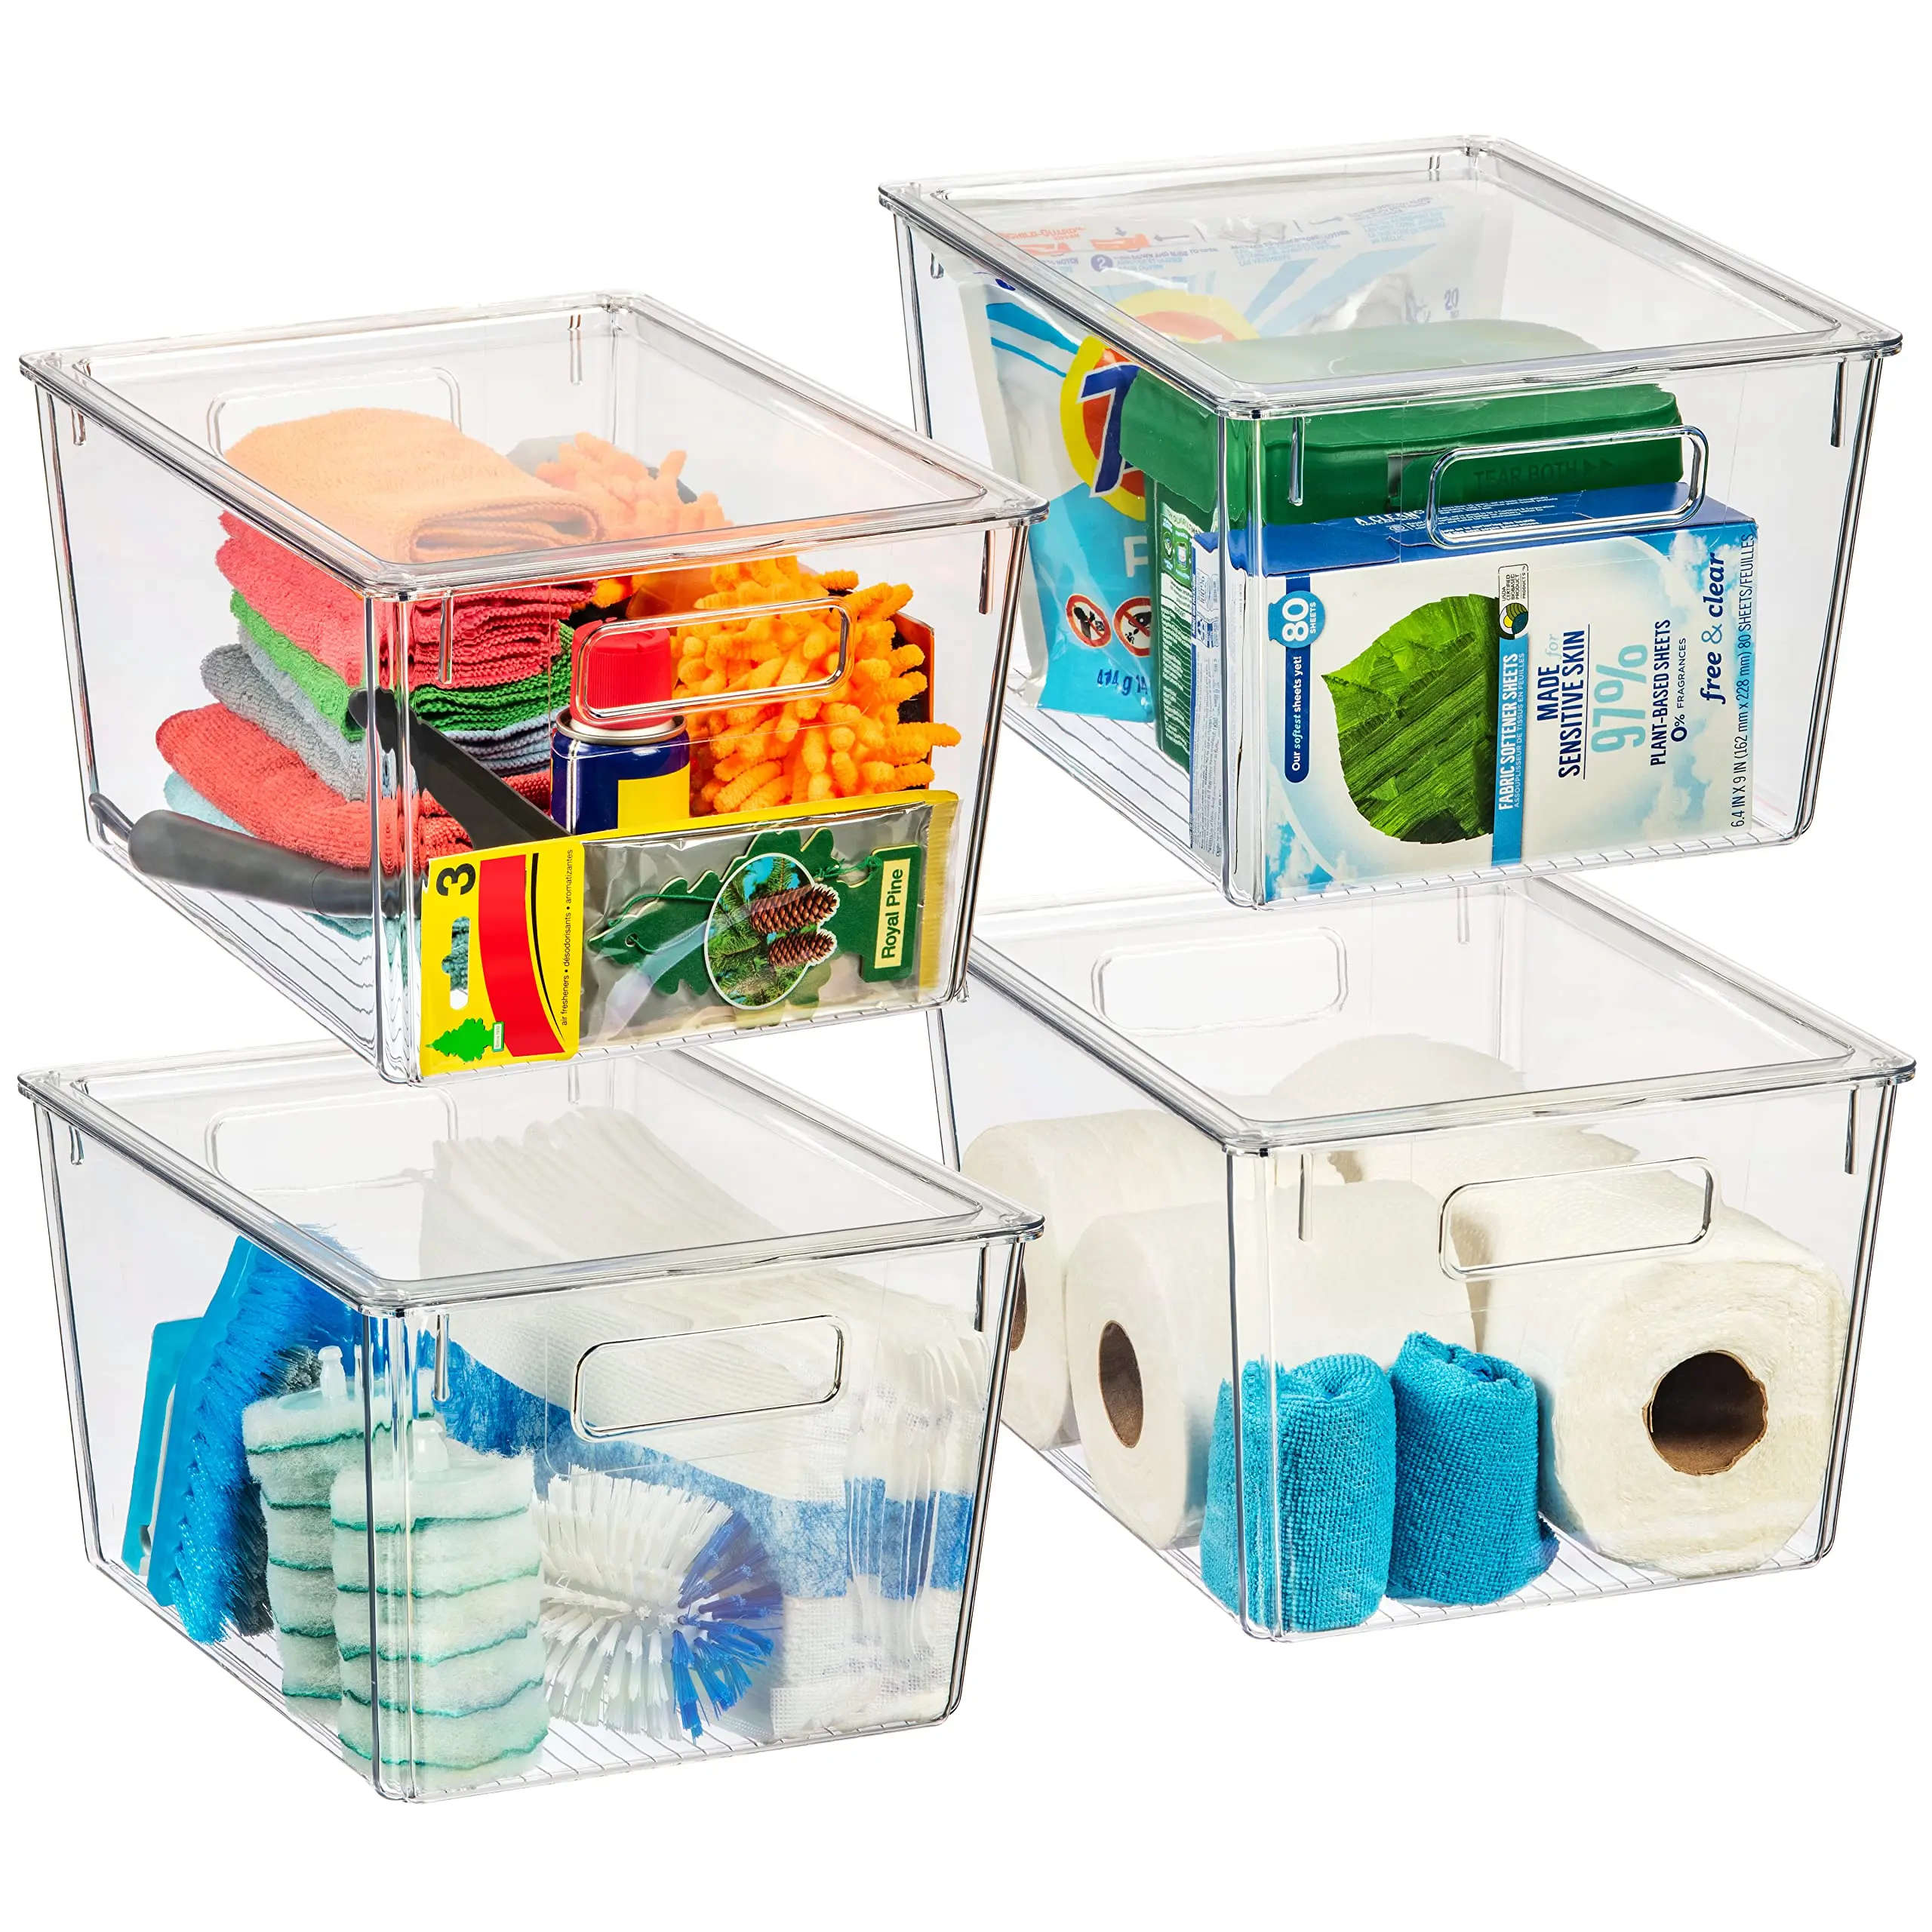 

X-Large Plastic Storage Bins With Lids - Perfect for Kitchen, Pantry, Fridge Organization and Storage